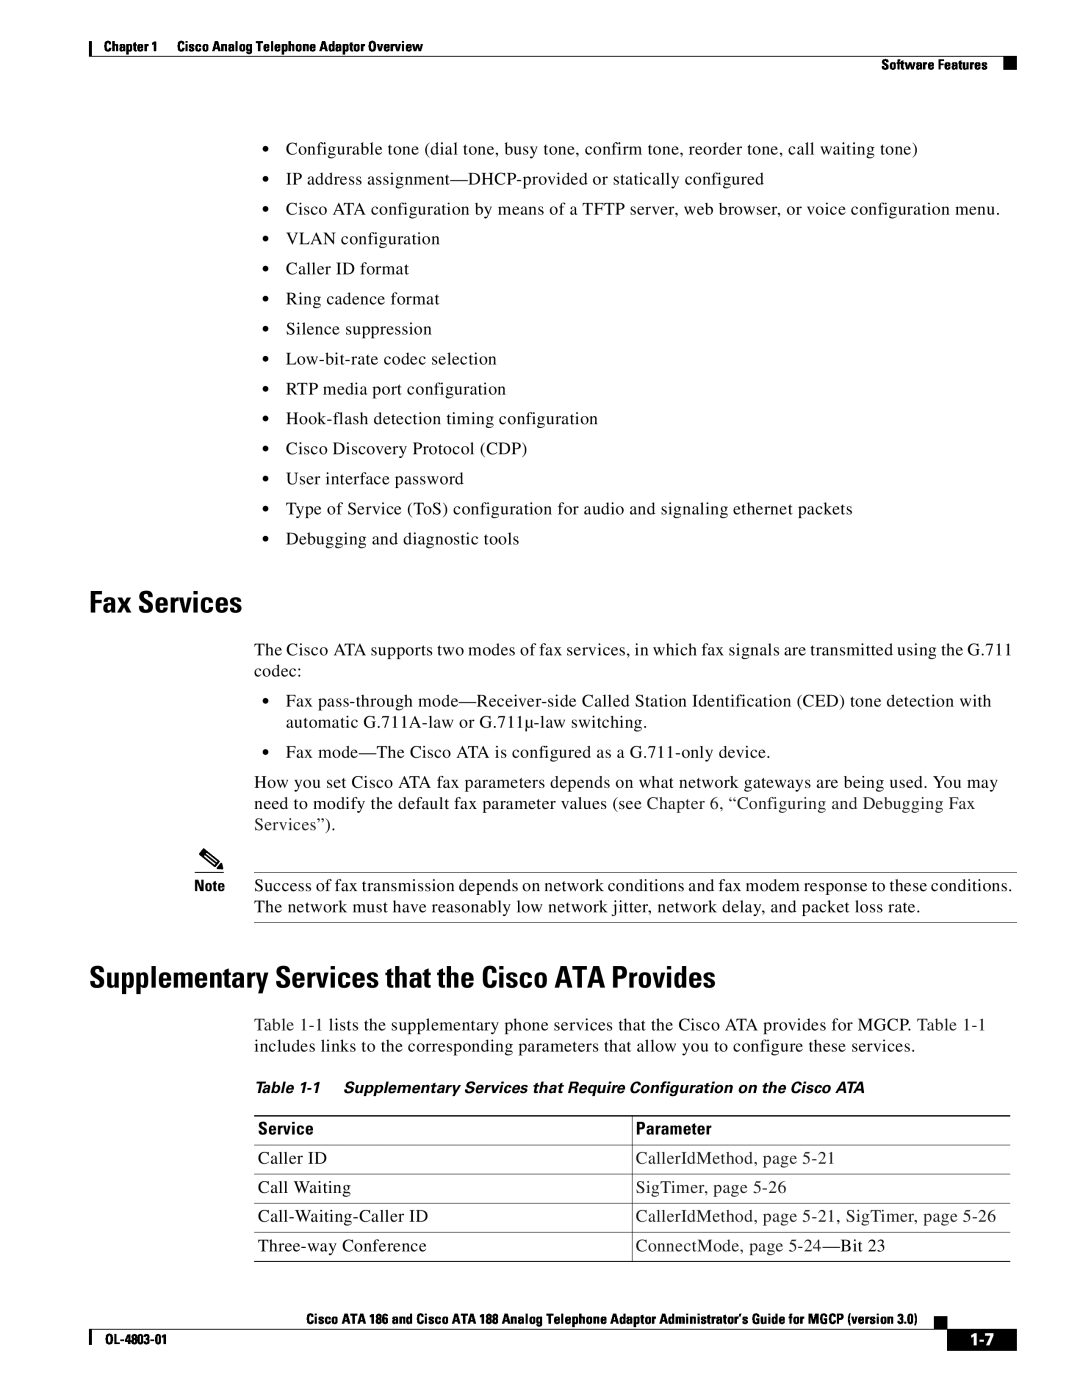 Cisco Systems ATA 186 Fax Services, Supplementary Services that the Cisco ATA Provides, Parameter, CallerIdMethod, page 